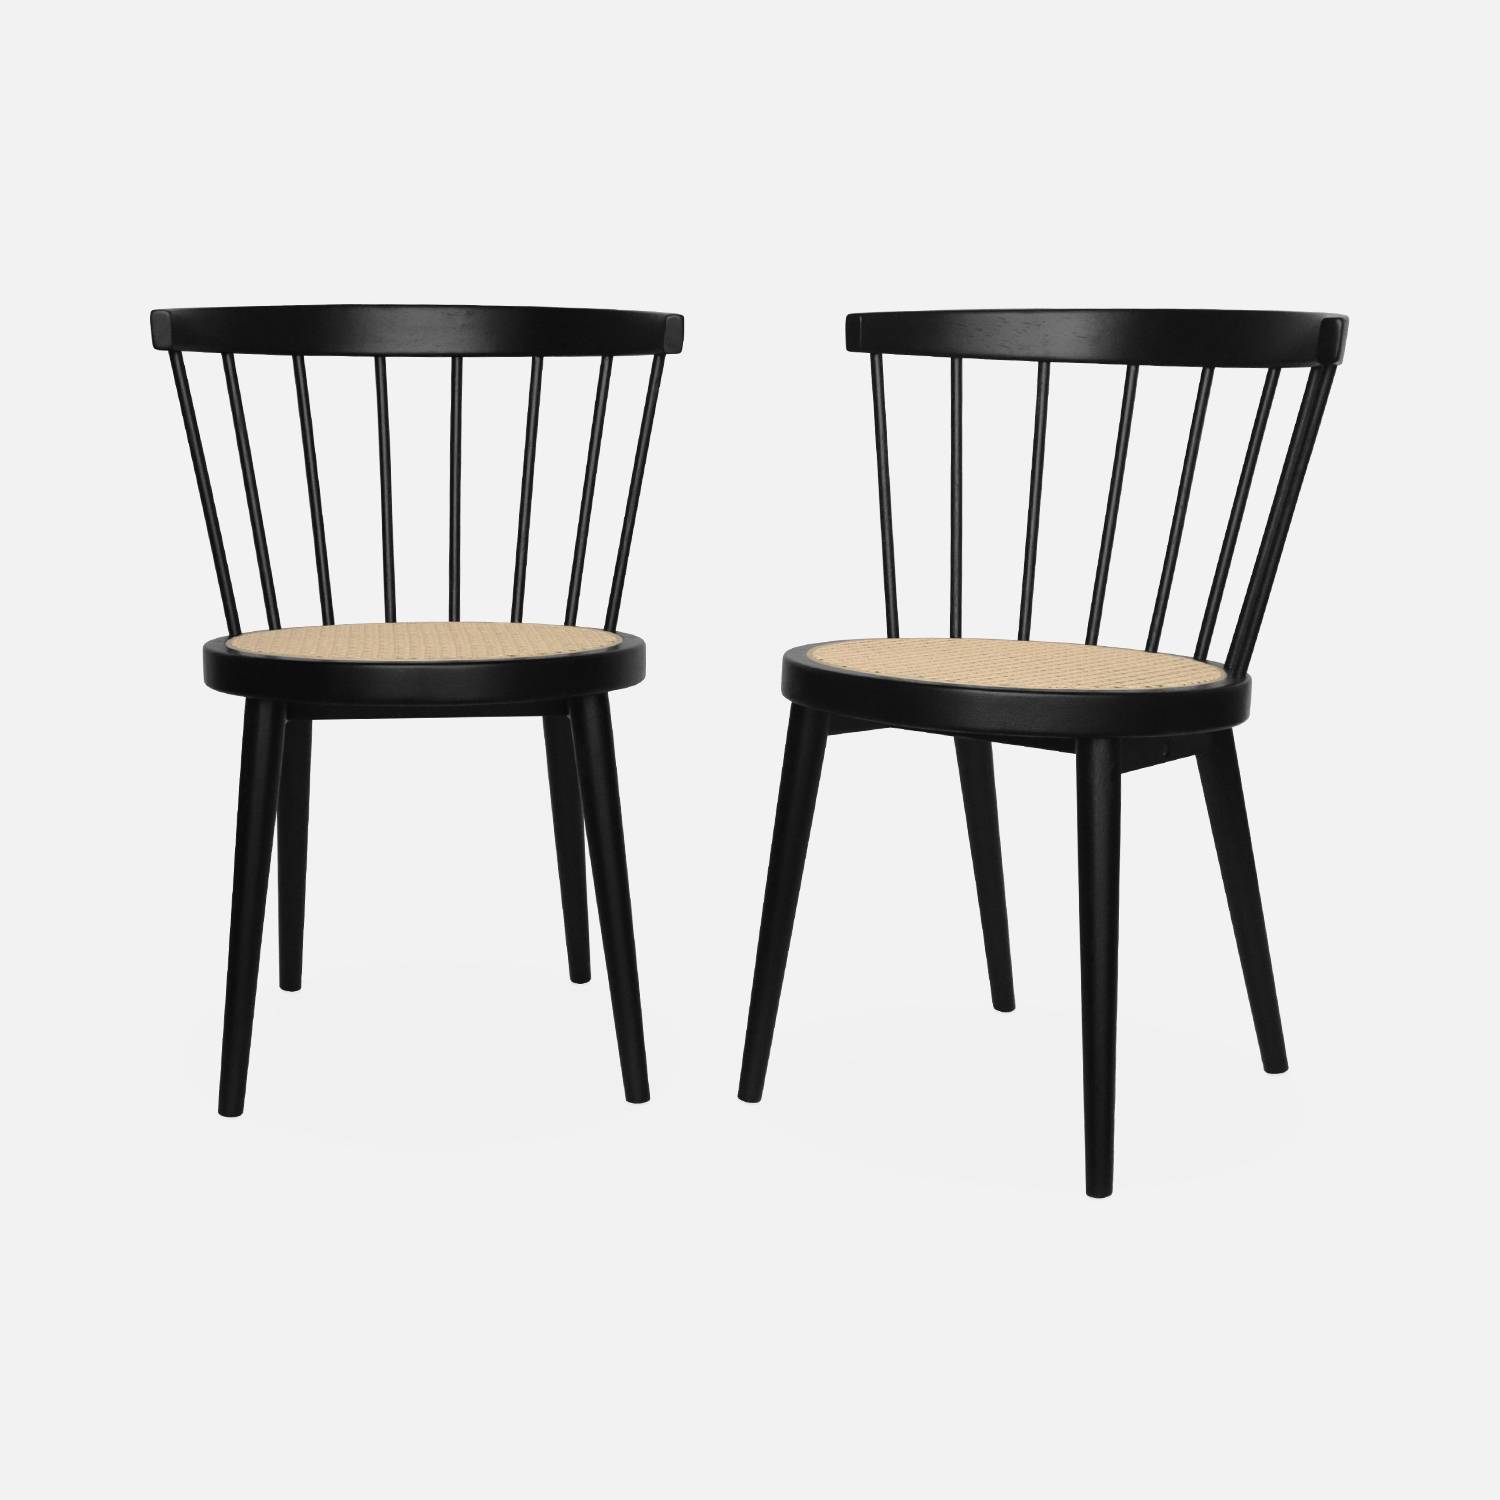 Pair of wood and cane dining chairs, black | sweeek